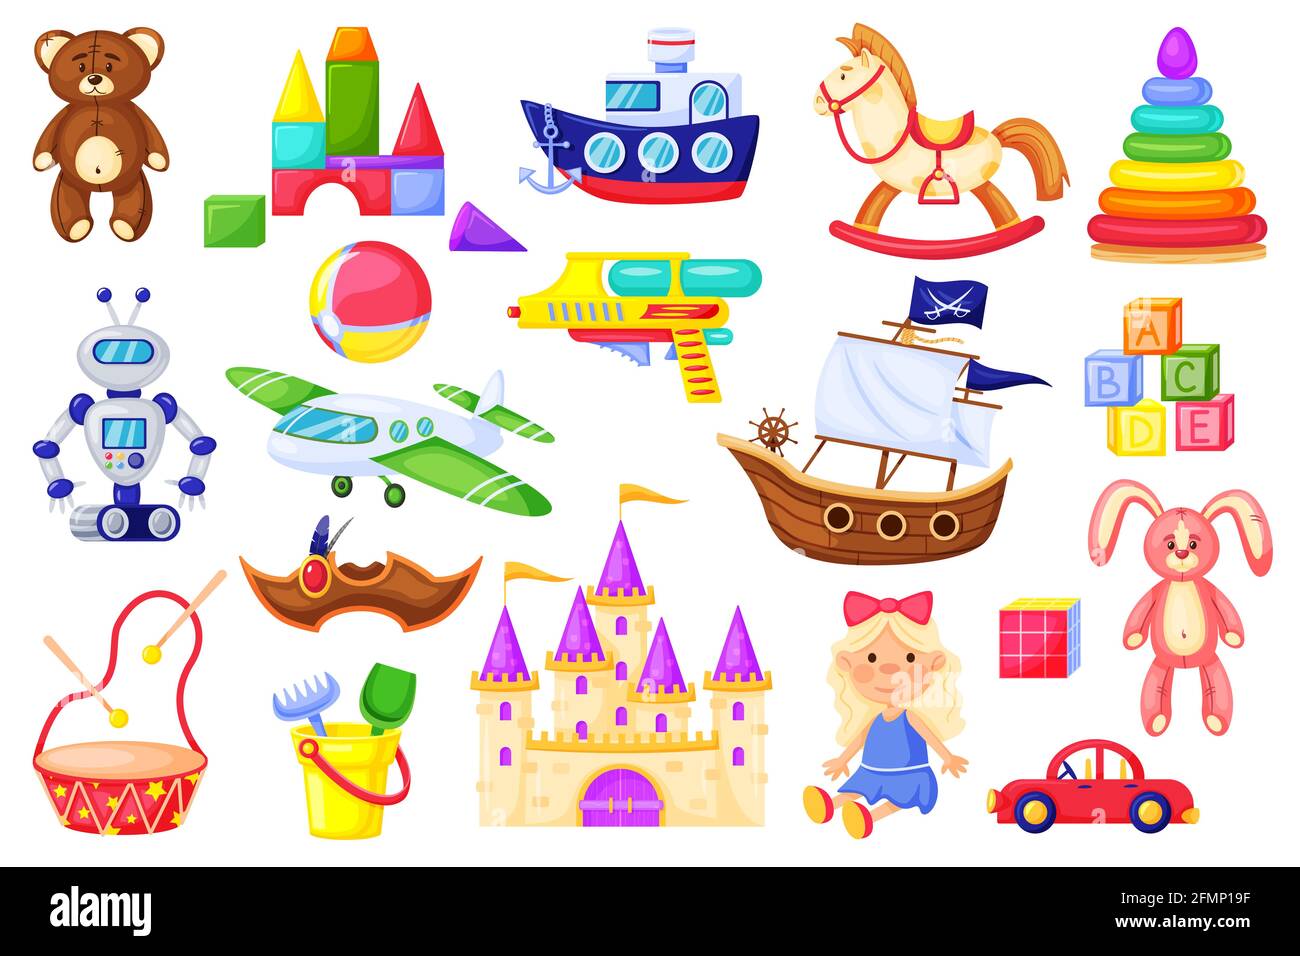 Kids cartoon toy. Cute baby doll, teddy bear, bunny, airplane, car, robot, drum, cubes, blocks. Game toys for children to play vector set. Isolated colorful objects for playroom collection Stock Vector